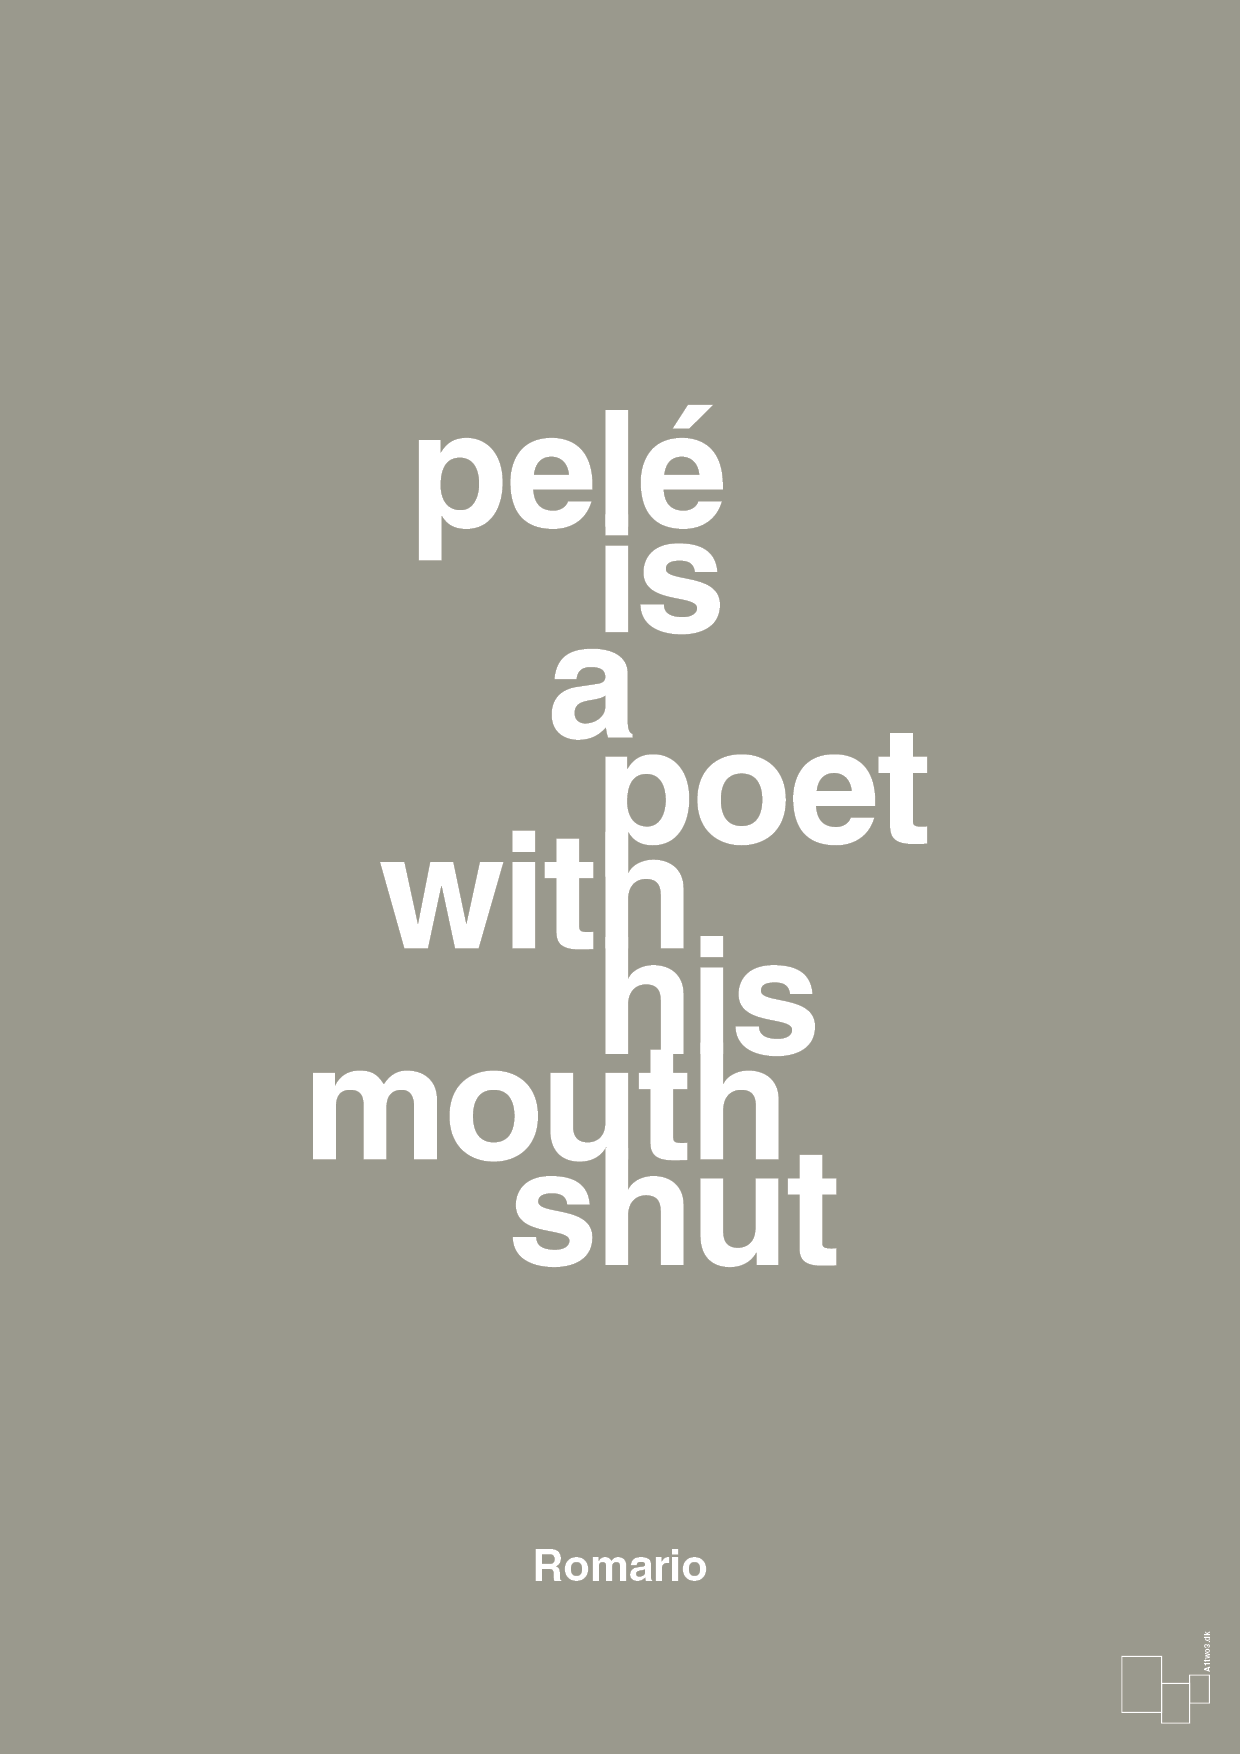 pelé is a poet with his mouth shut - Plakat med Citater i Battleship Gray